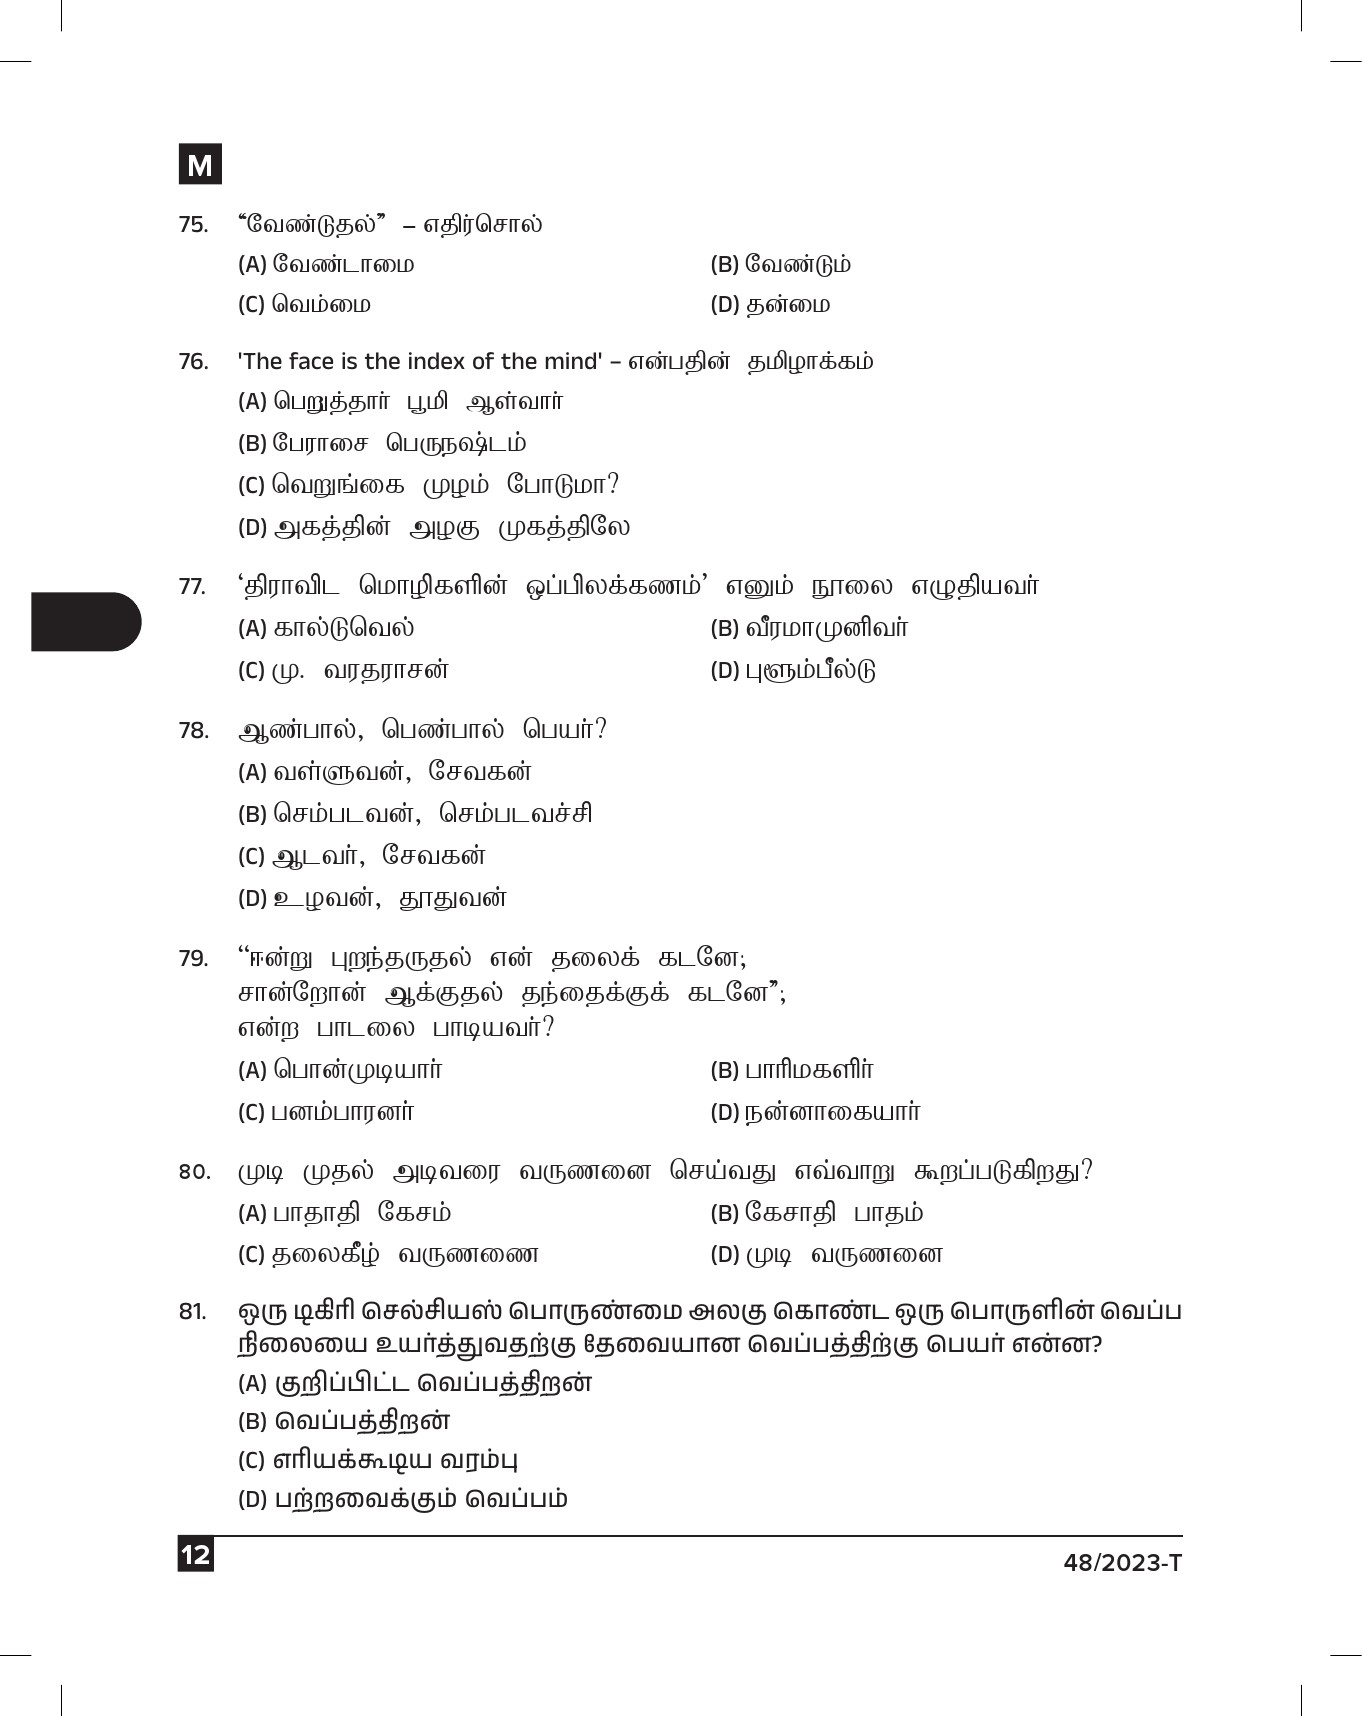 KPSC Fire and Rescue Officer Tamil Exam 2023 Code 0482023 T 11